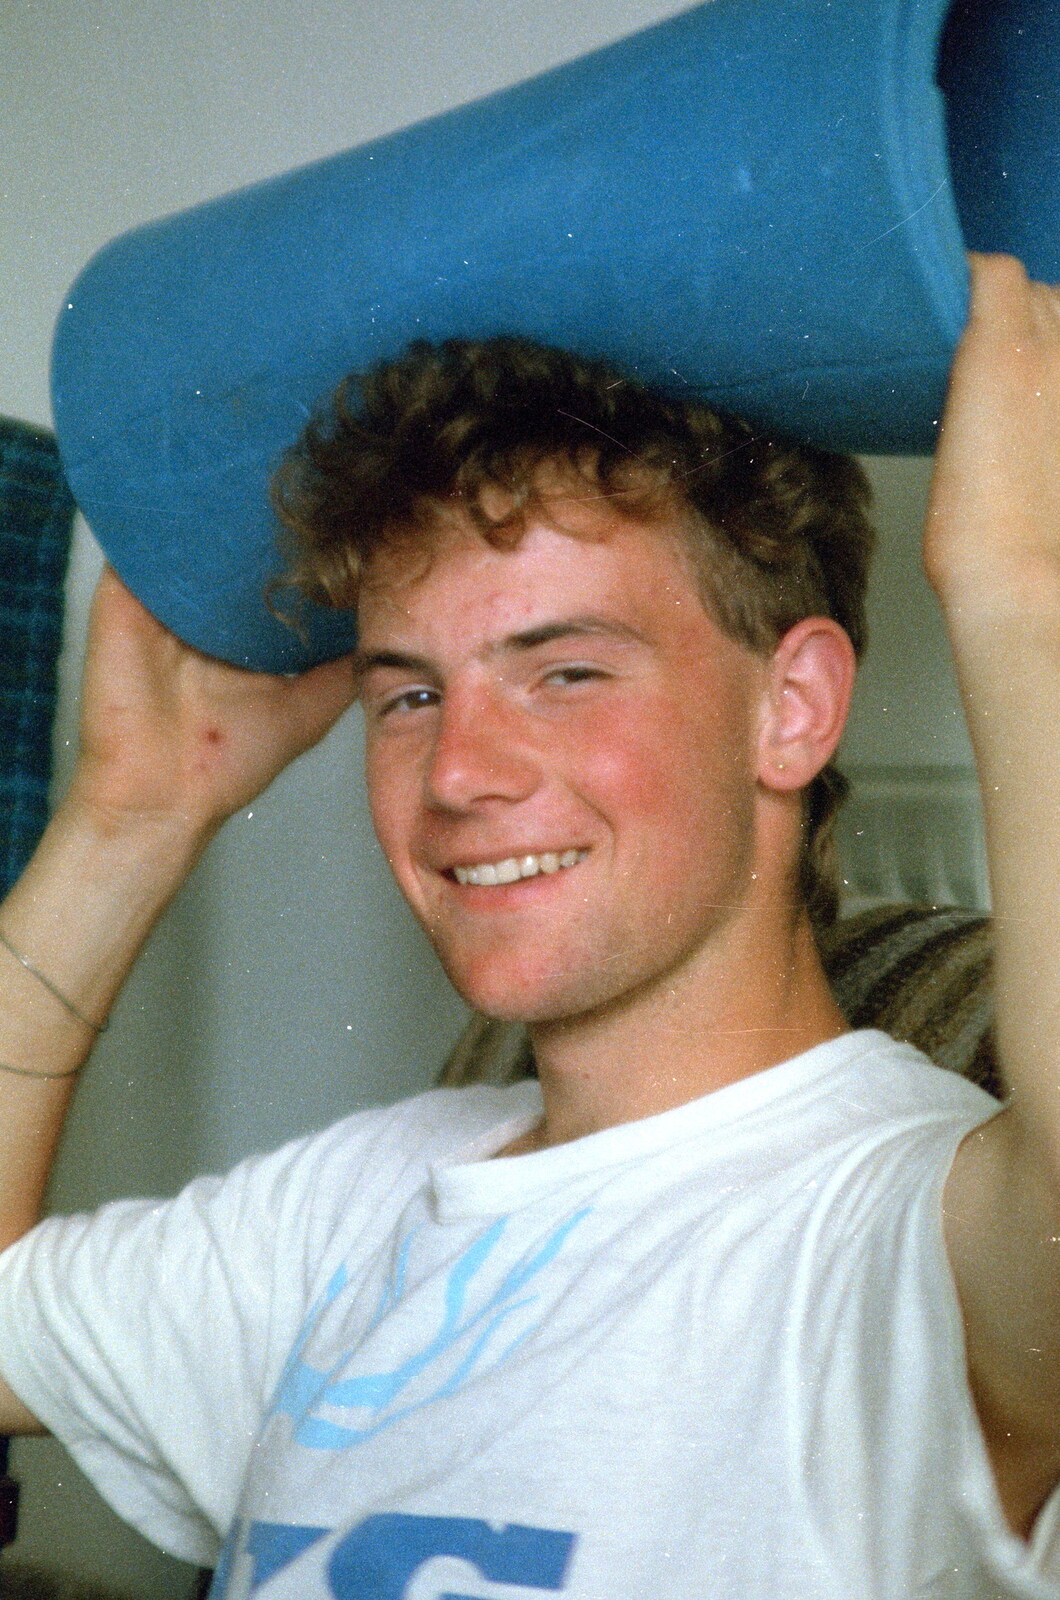 Malc with a bed-roll on his head from Uni: Riki And Dave's Place, Sutherland Road, Plymouth - 12th May 1986